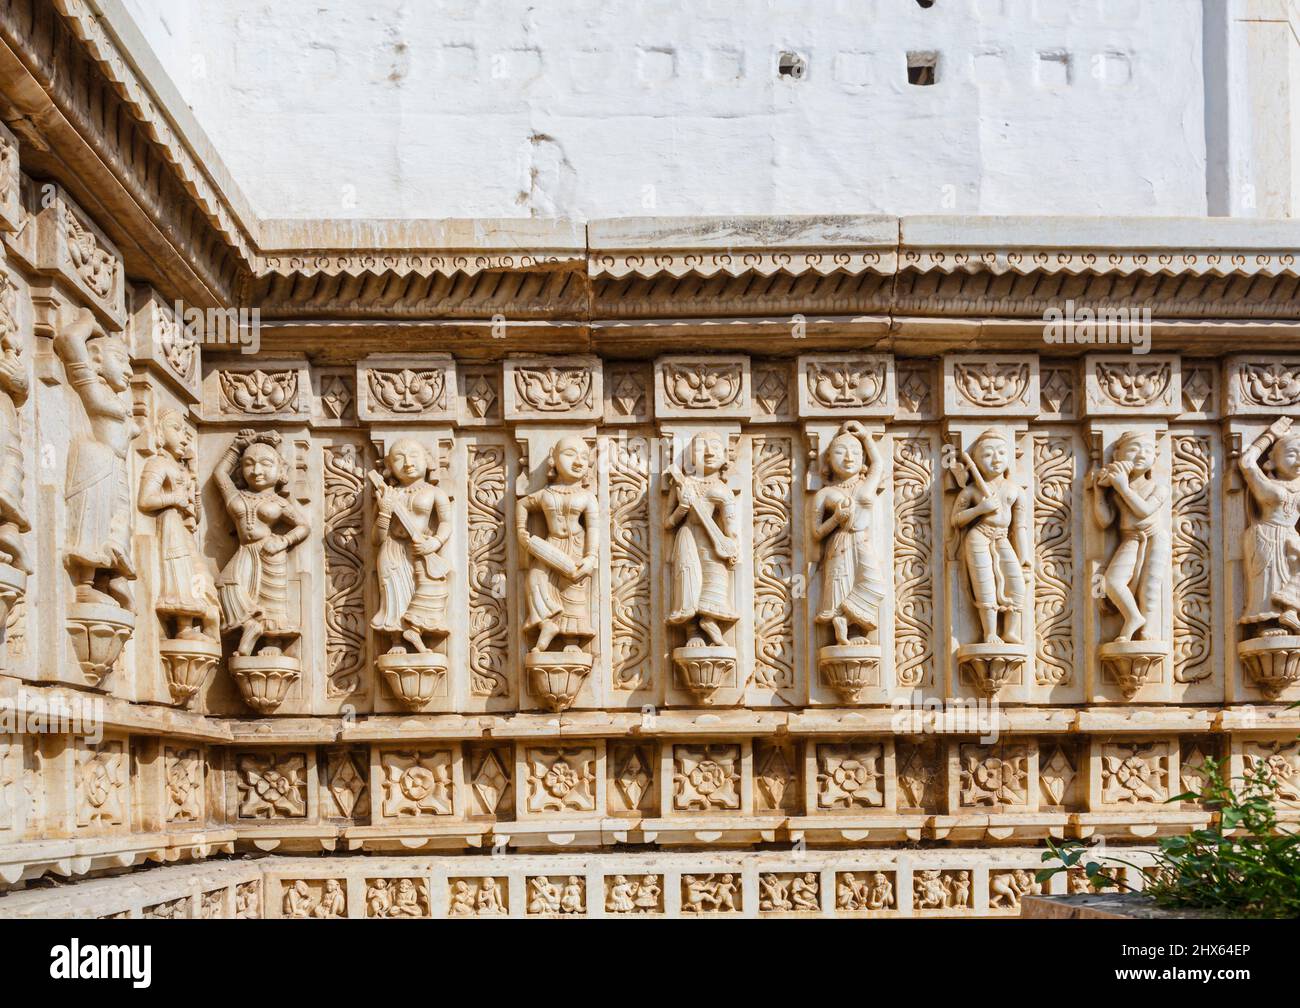 Wall carvings of female figures with musical instruments in the Hindu Shree Jagat Sheromani Ji Temple, Jagdish Chowk, Udaipur, Rajasthan, India Stock Photo